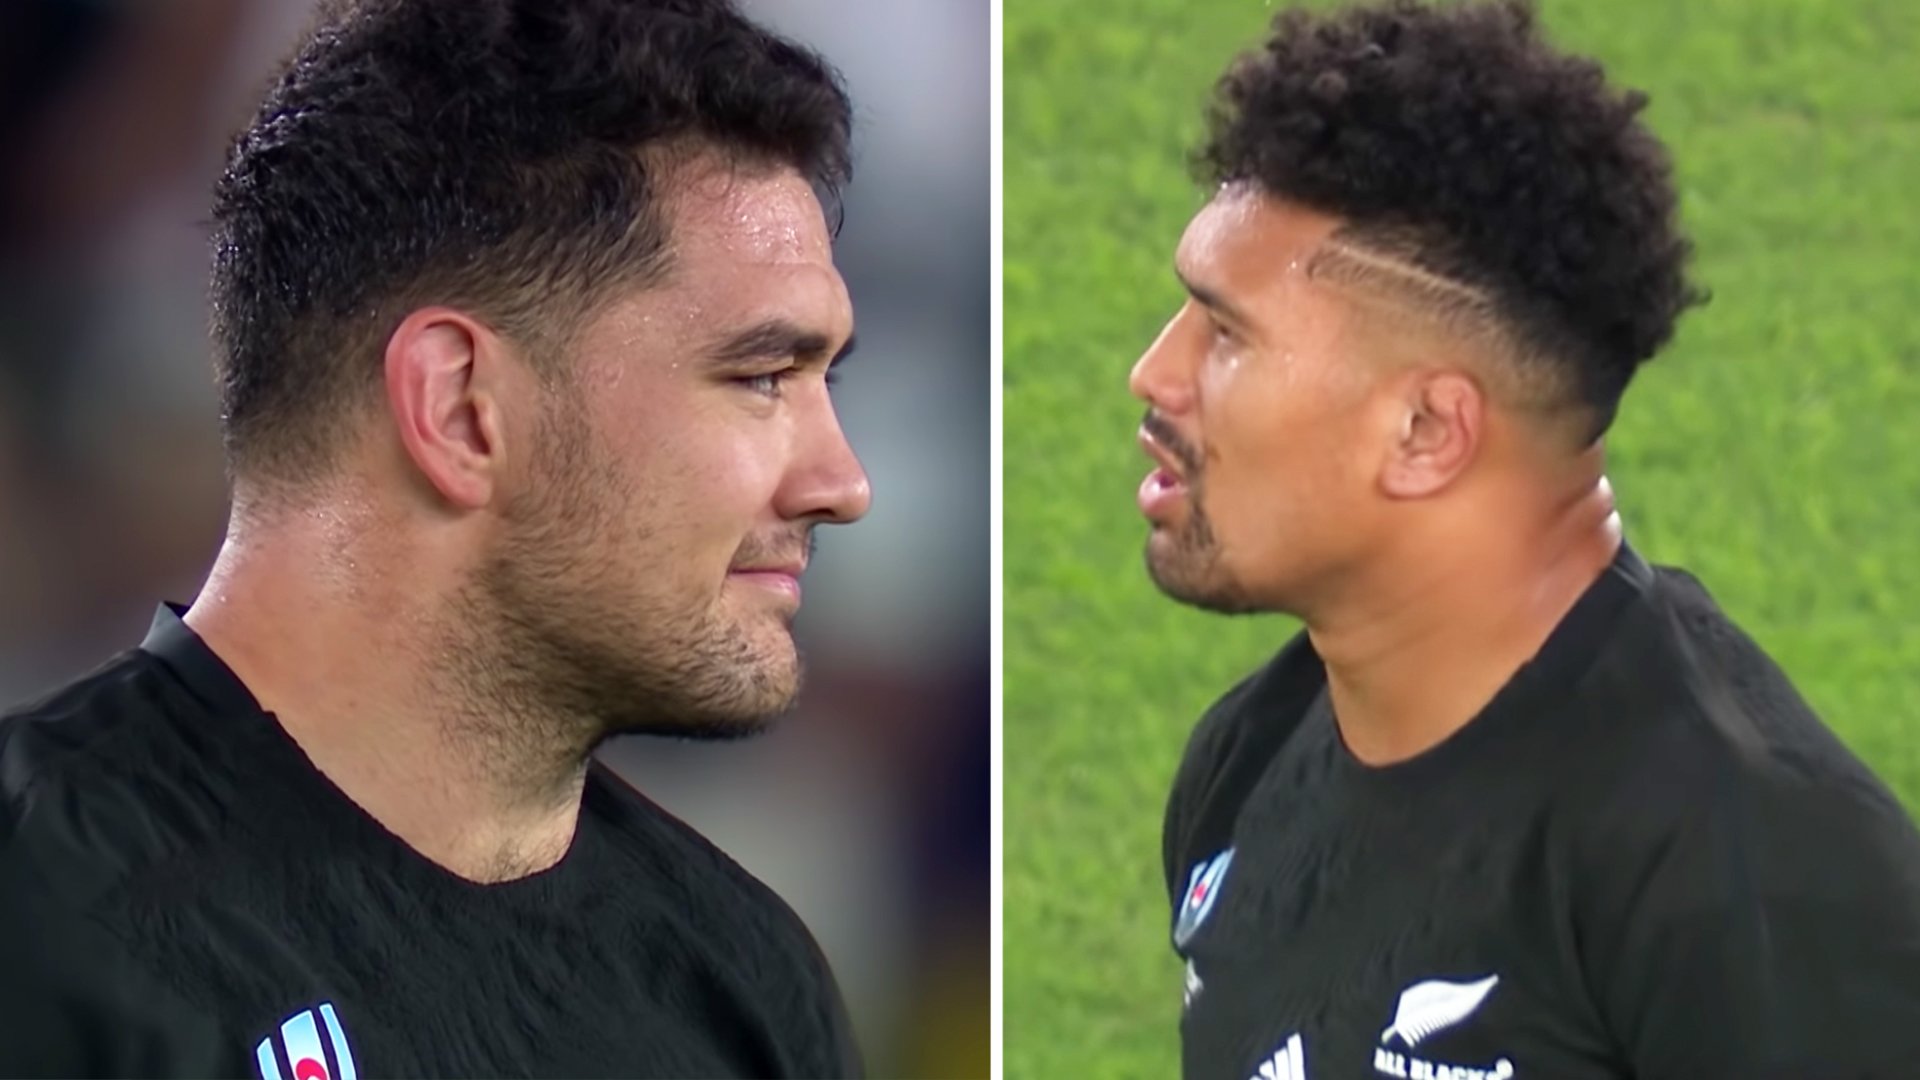 Ardie Savea jamming to house music seconds before a World Cup semi final is EVERYTHING